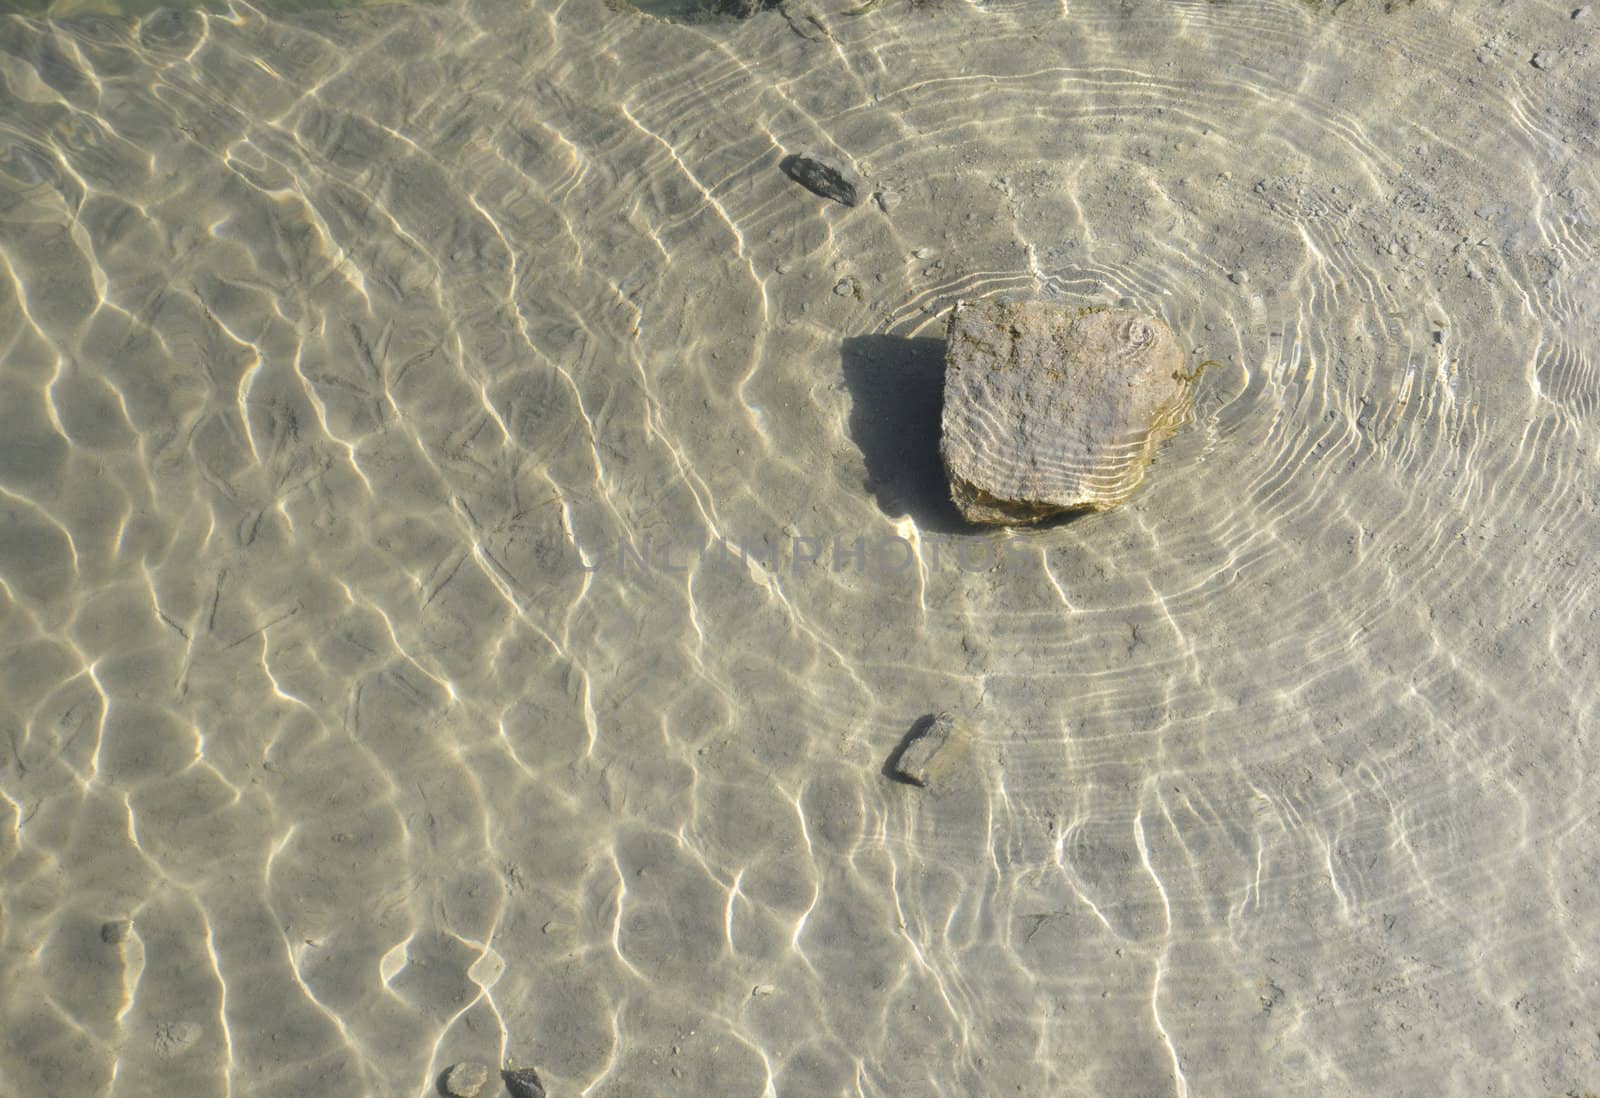 One stone just under the water surface by shkyo30